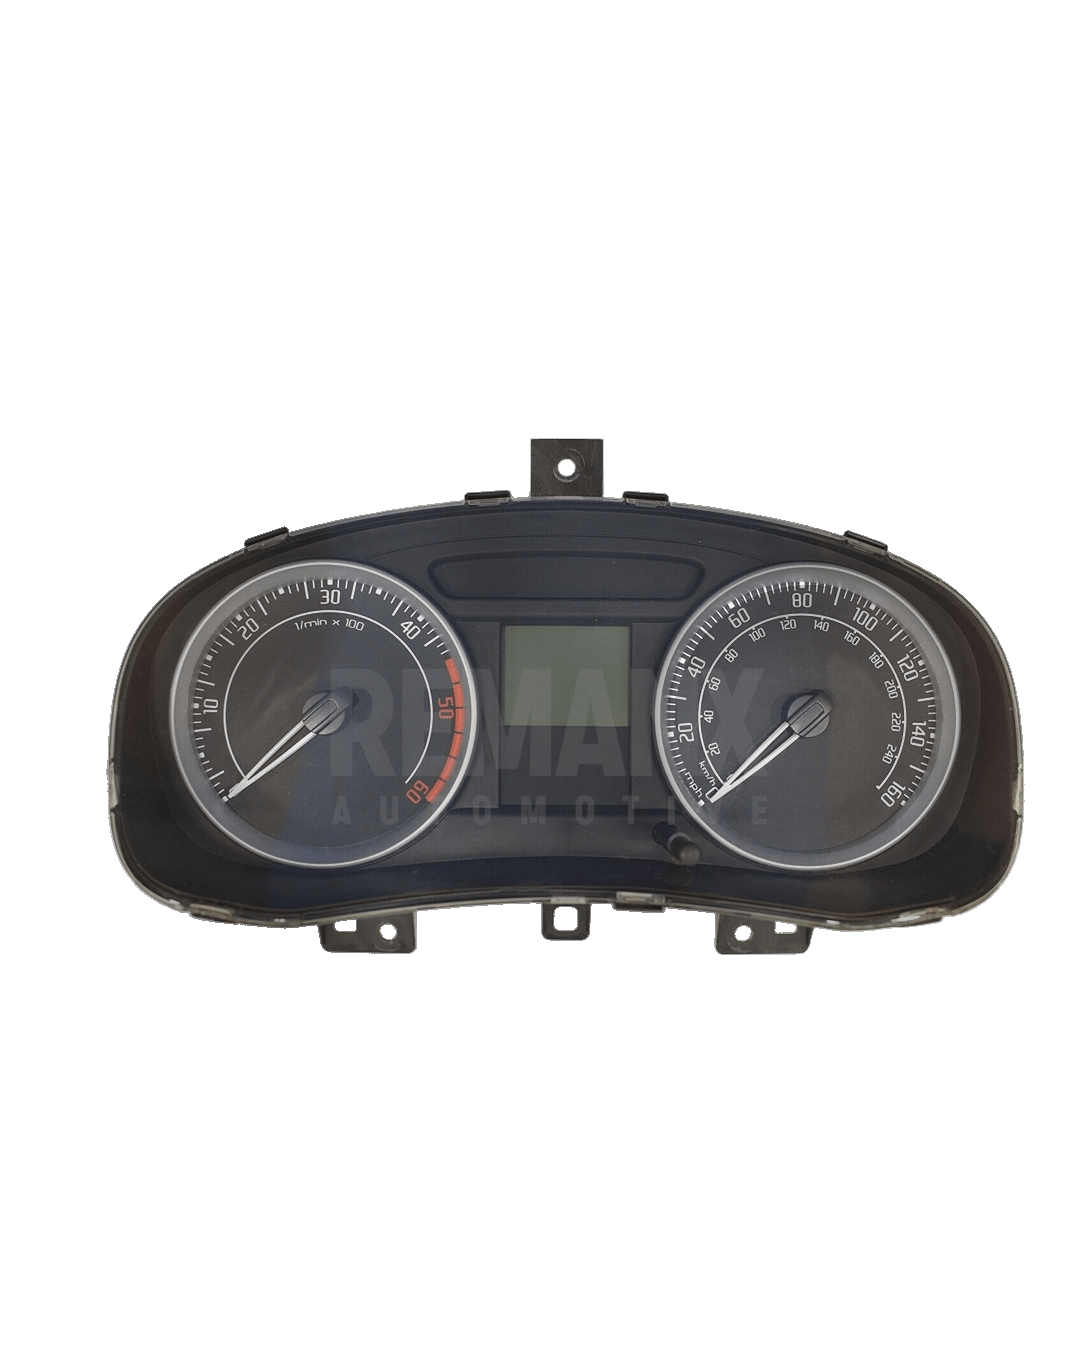 Skoda Roomster & Fabia Mk 2 Instrument cluster from Remanx